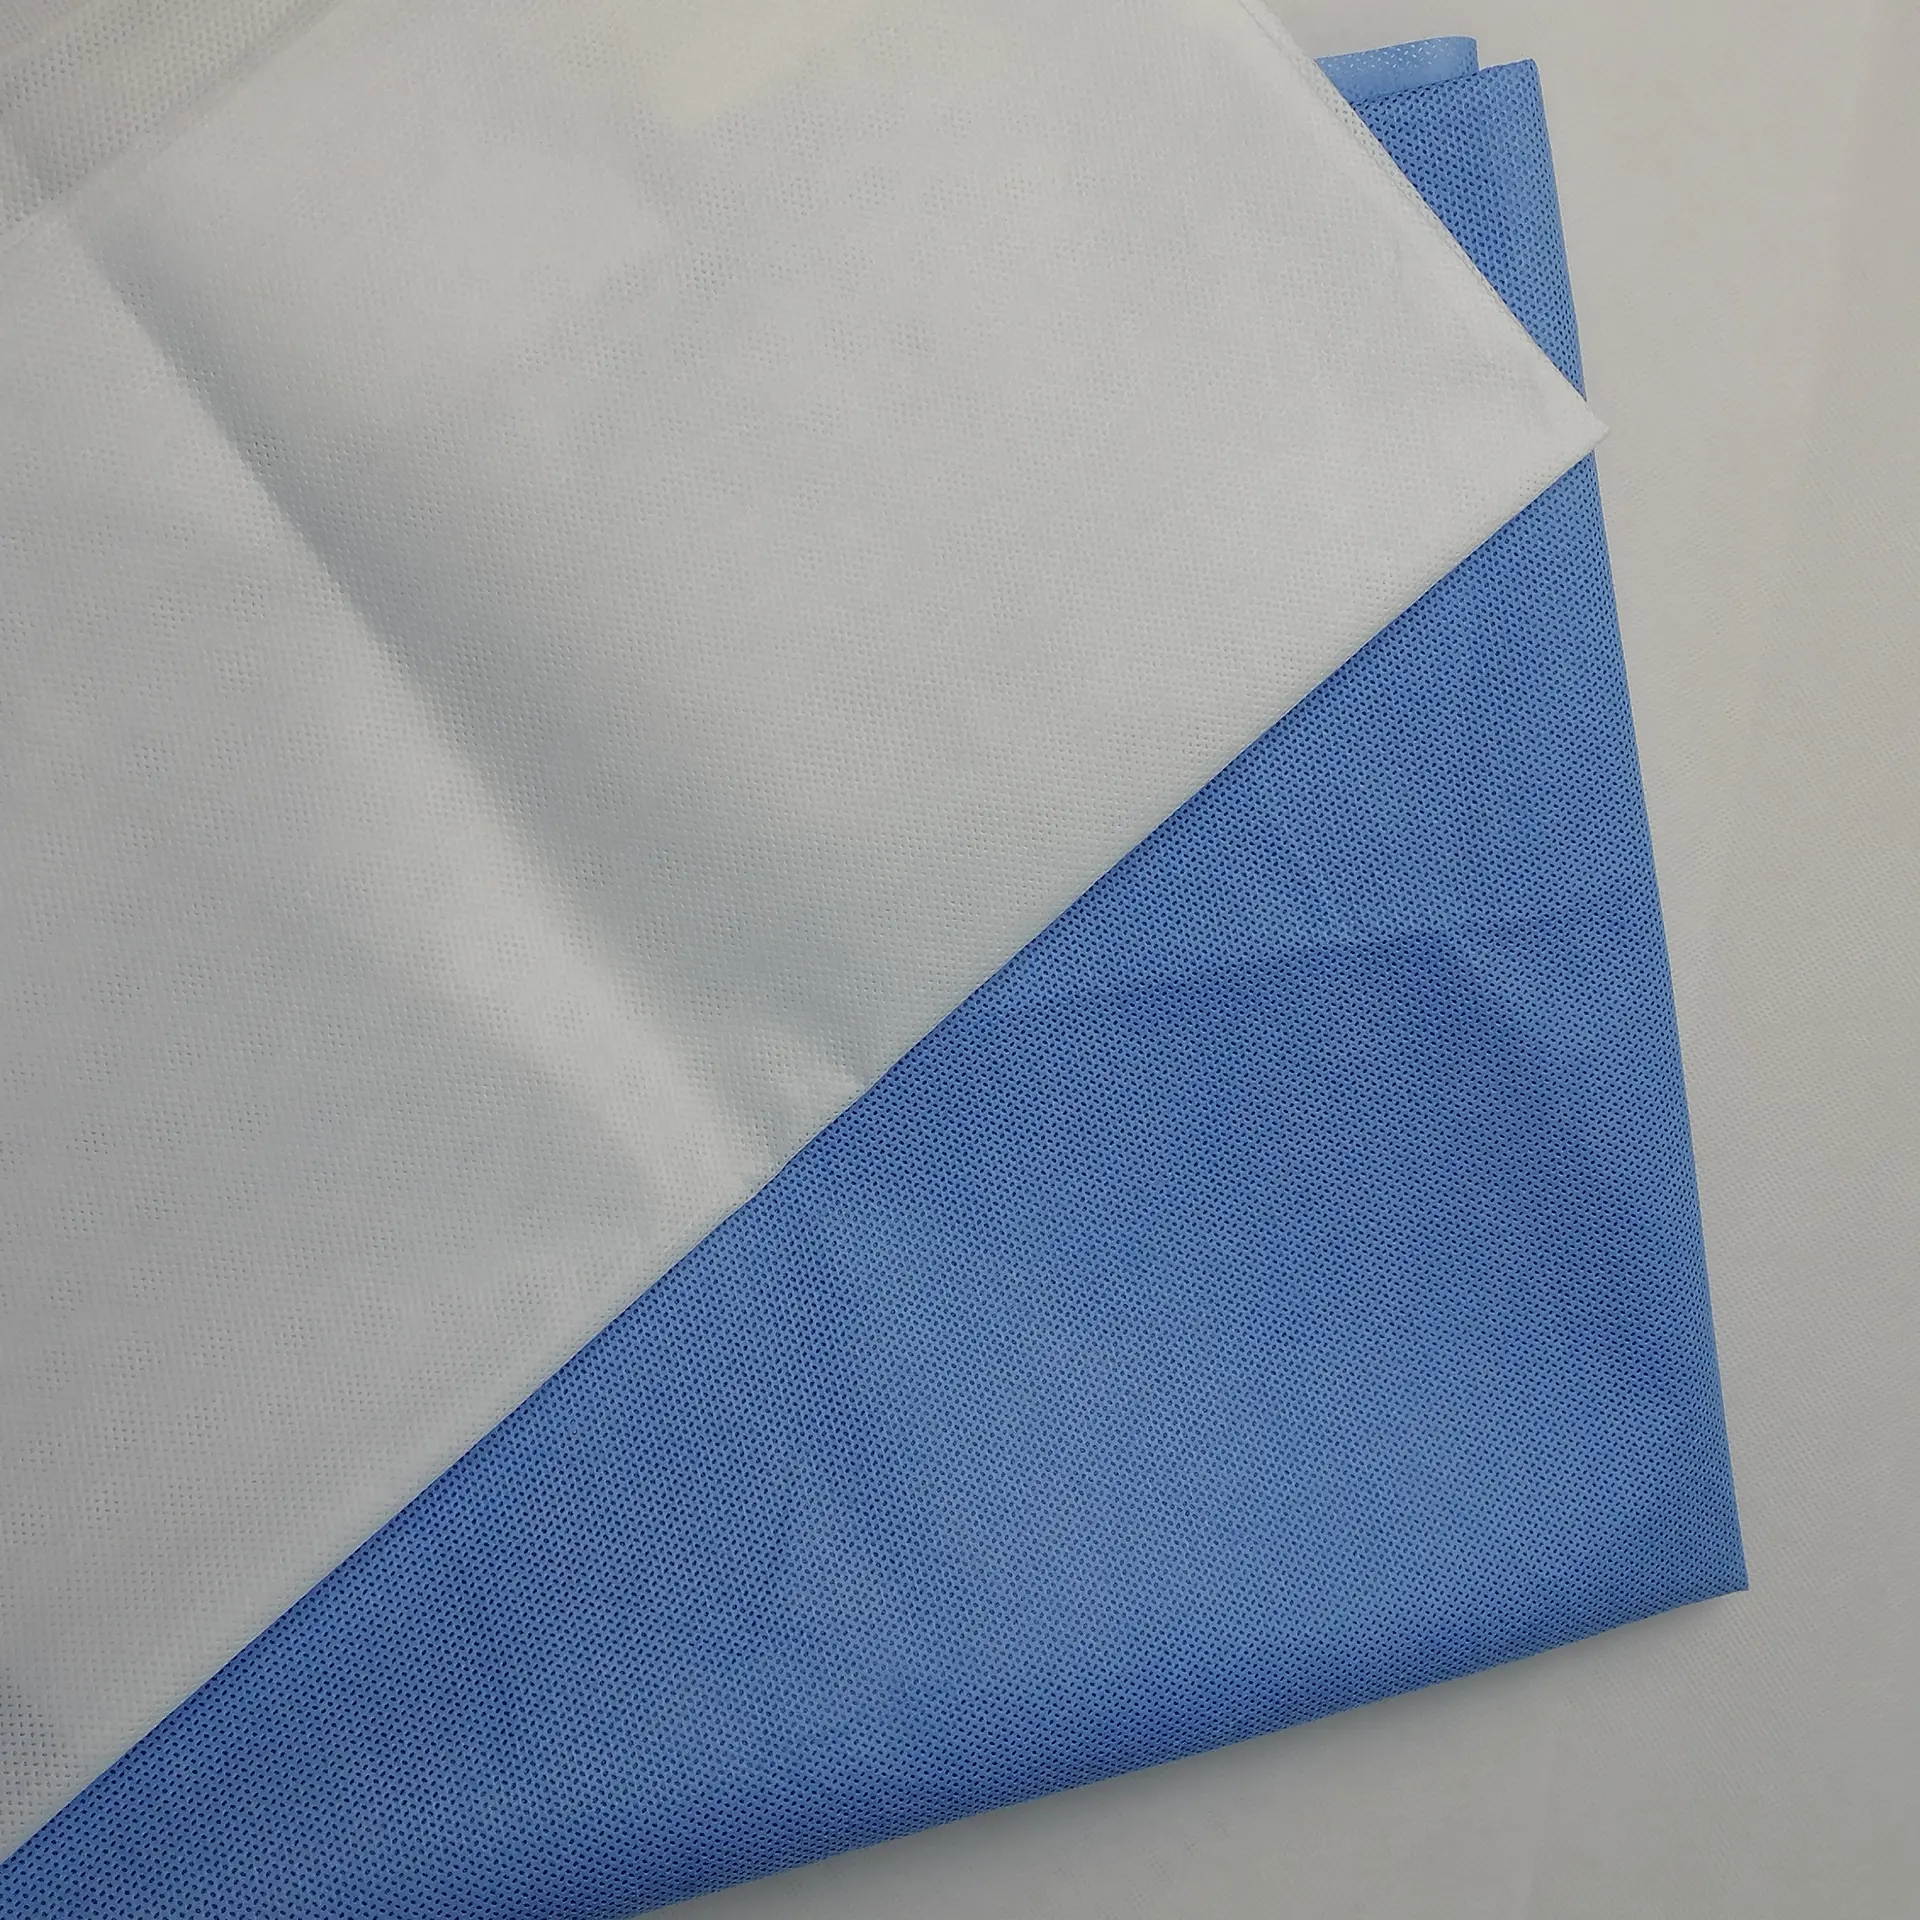 Factory direct low cost medical sms spunbond nonwoven